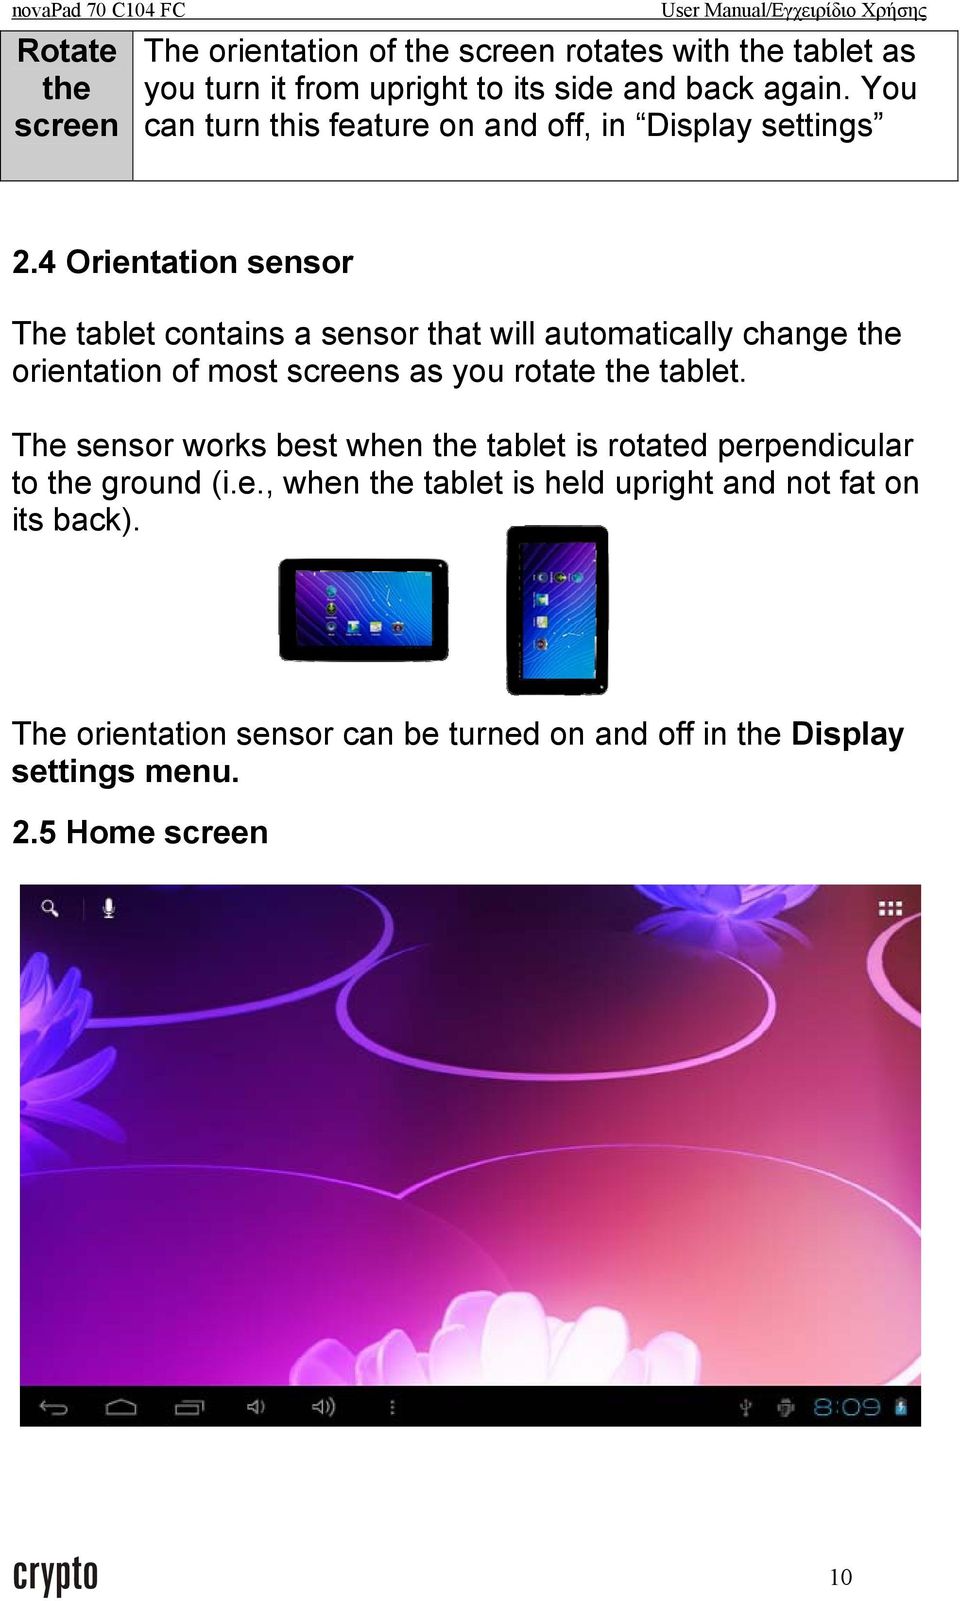 4 Orientation sensor The tablet contains a sensor that will automatically change the orientation of most screens as you rotate the tablet.